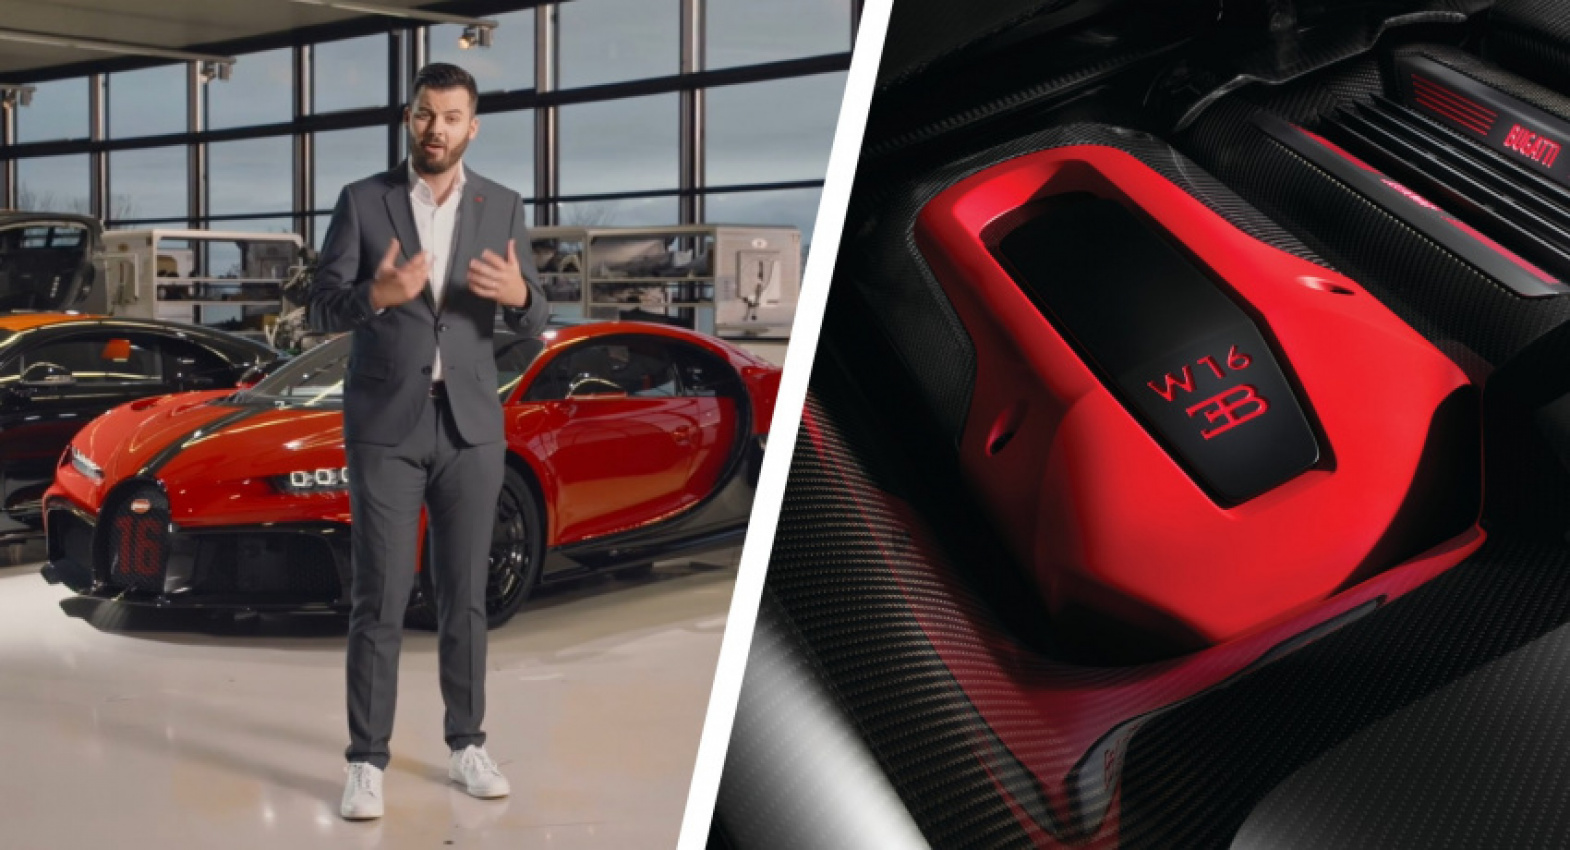 autos, bugatti, cars, news, electric vehicles, reports, rimac, rimac nevera, supercar, mate rimac details the future of bugatti and sounds like the car guy the brand deserves